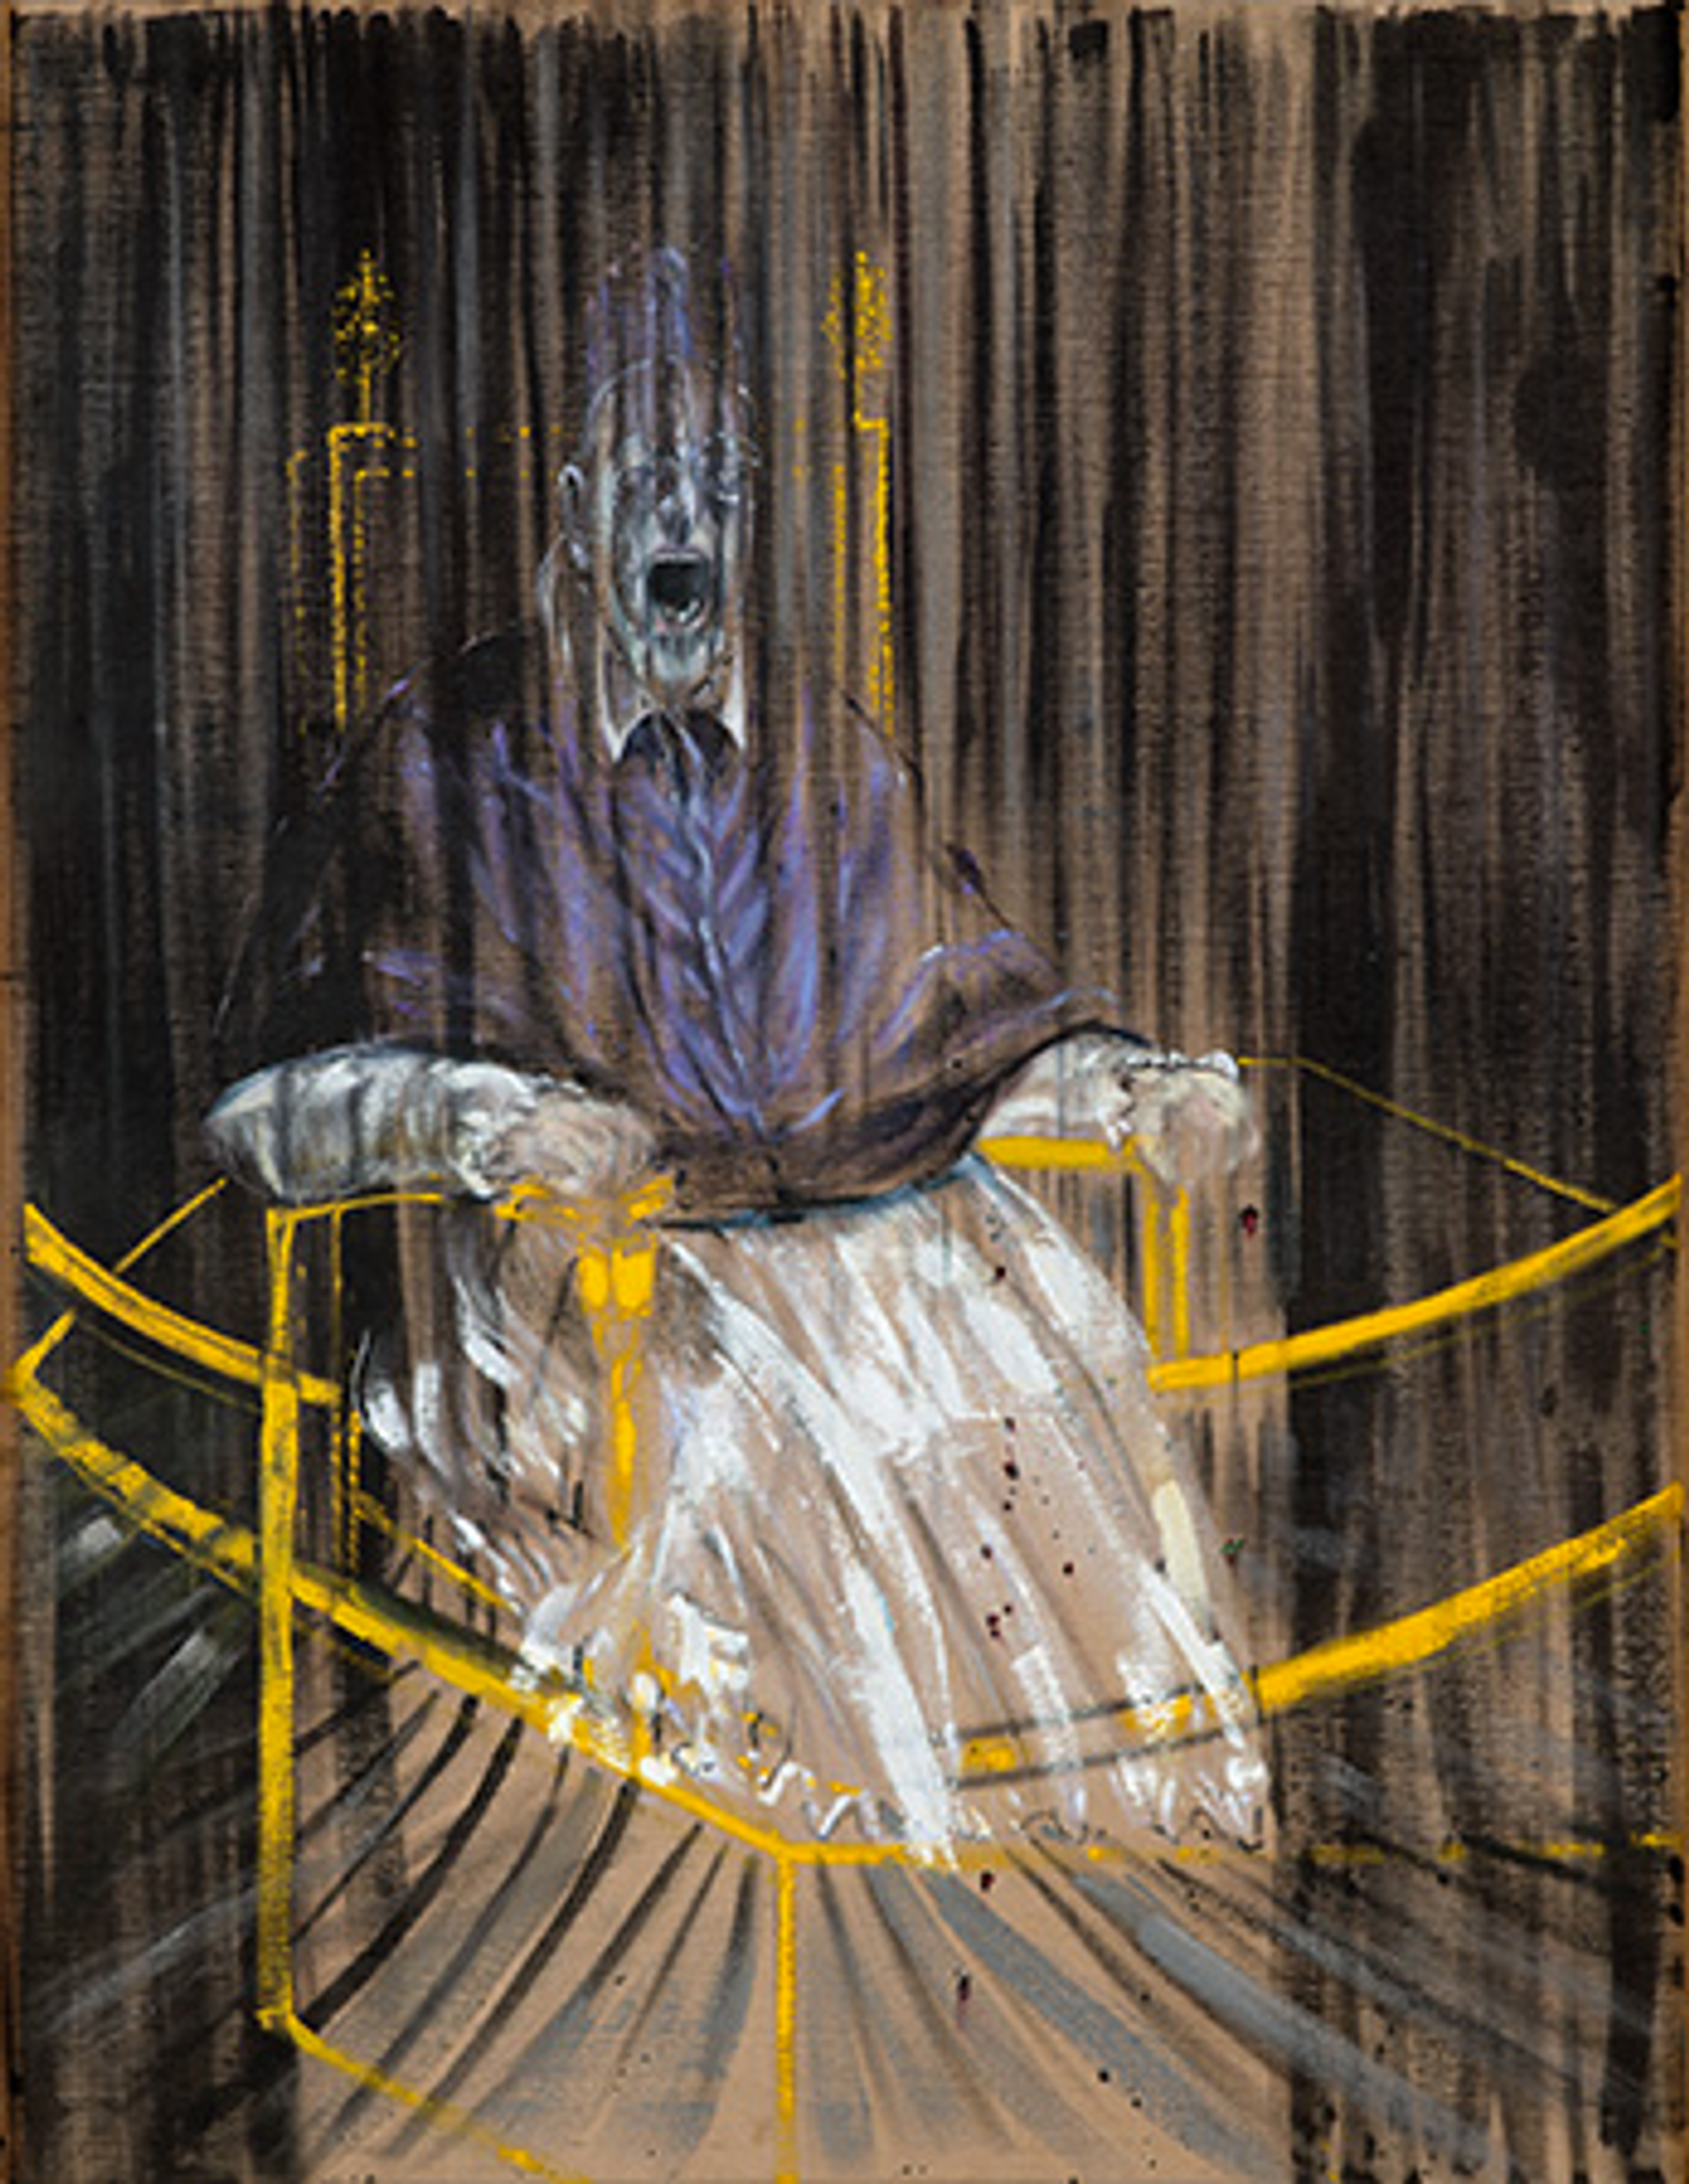 Francis Bacon’s Study After Velázquez's Portrait Of Pope Innocent X. A distorted, haunting image of Pope Innocent X